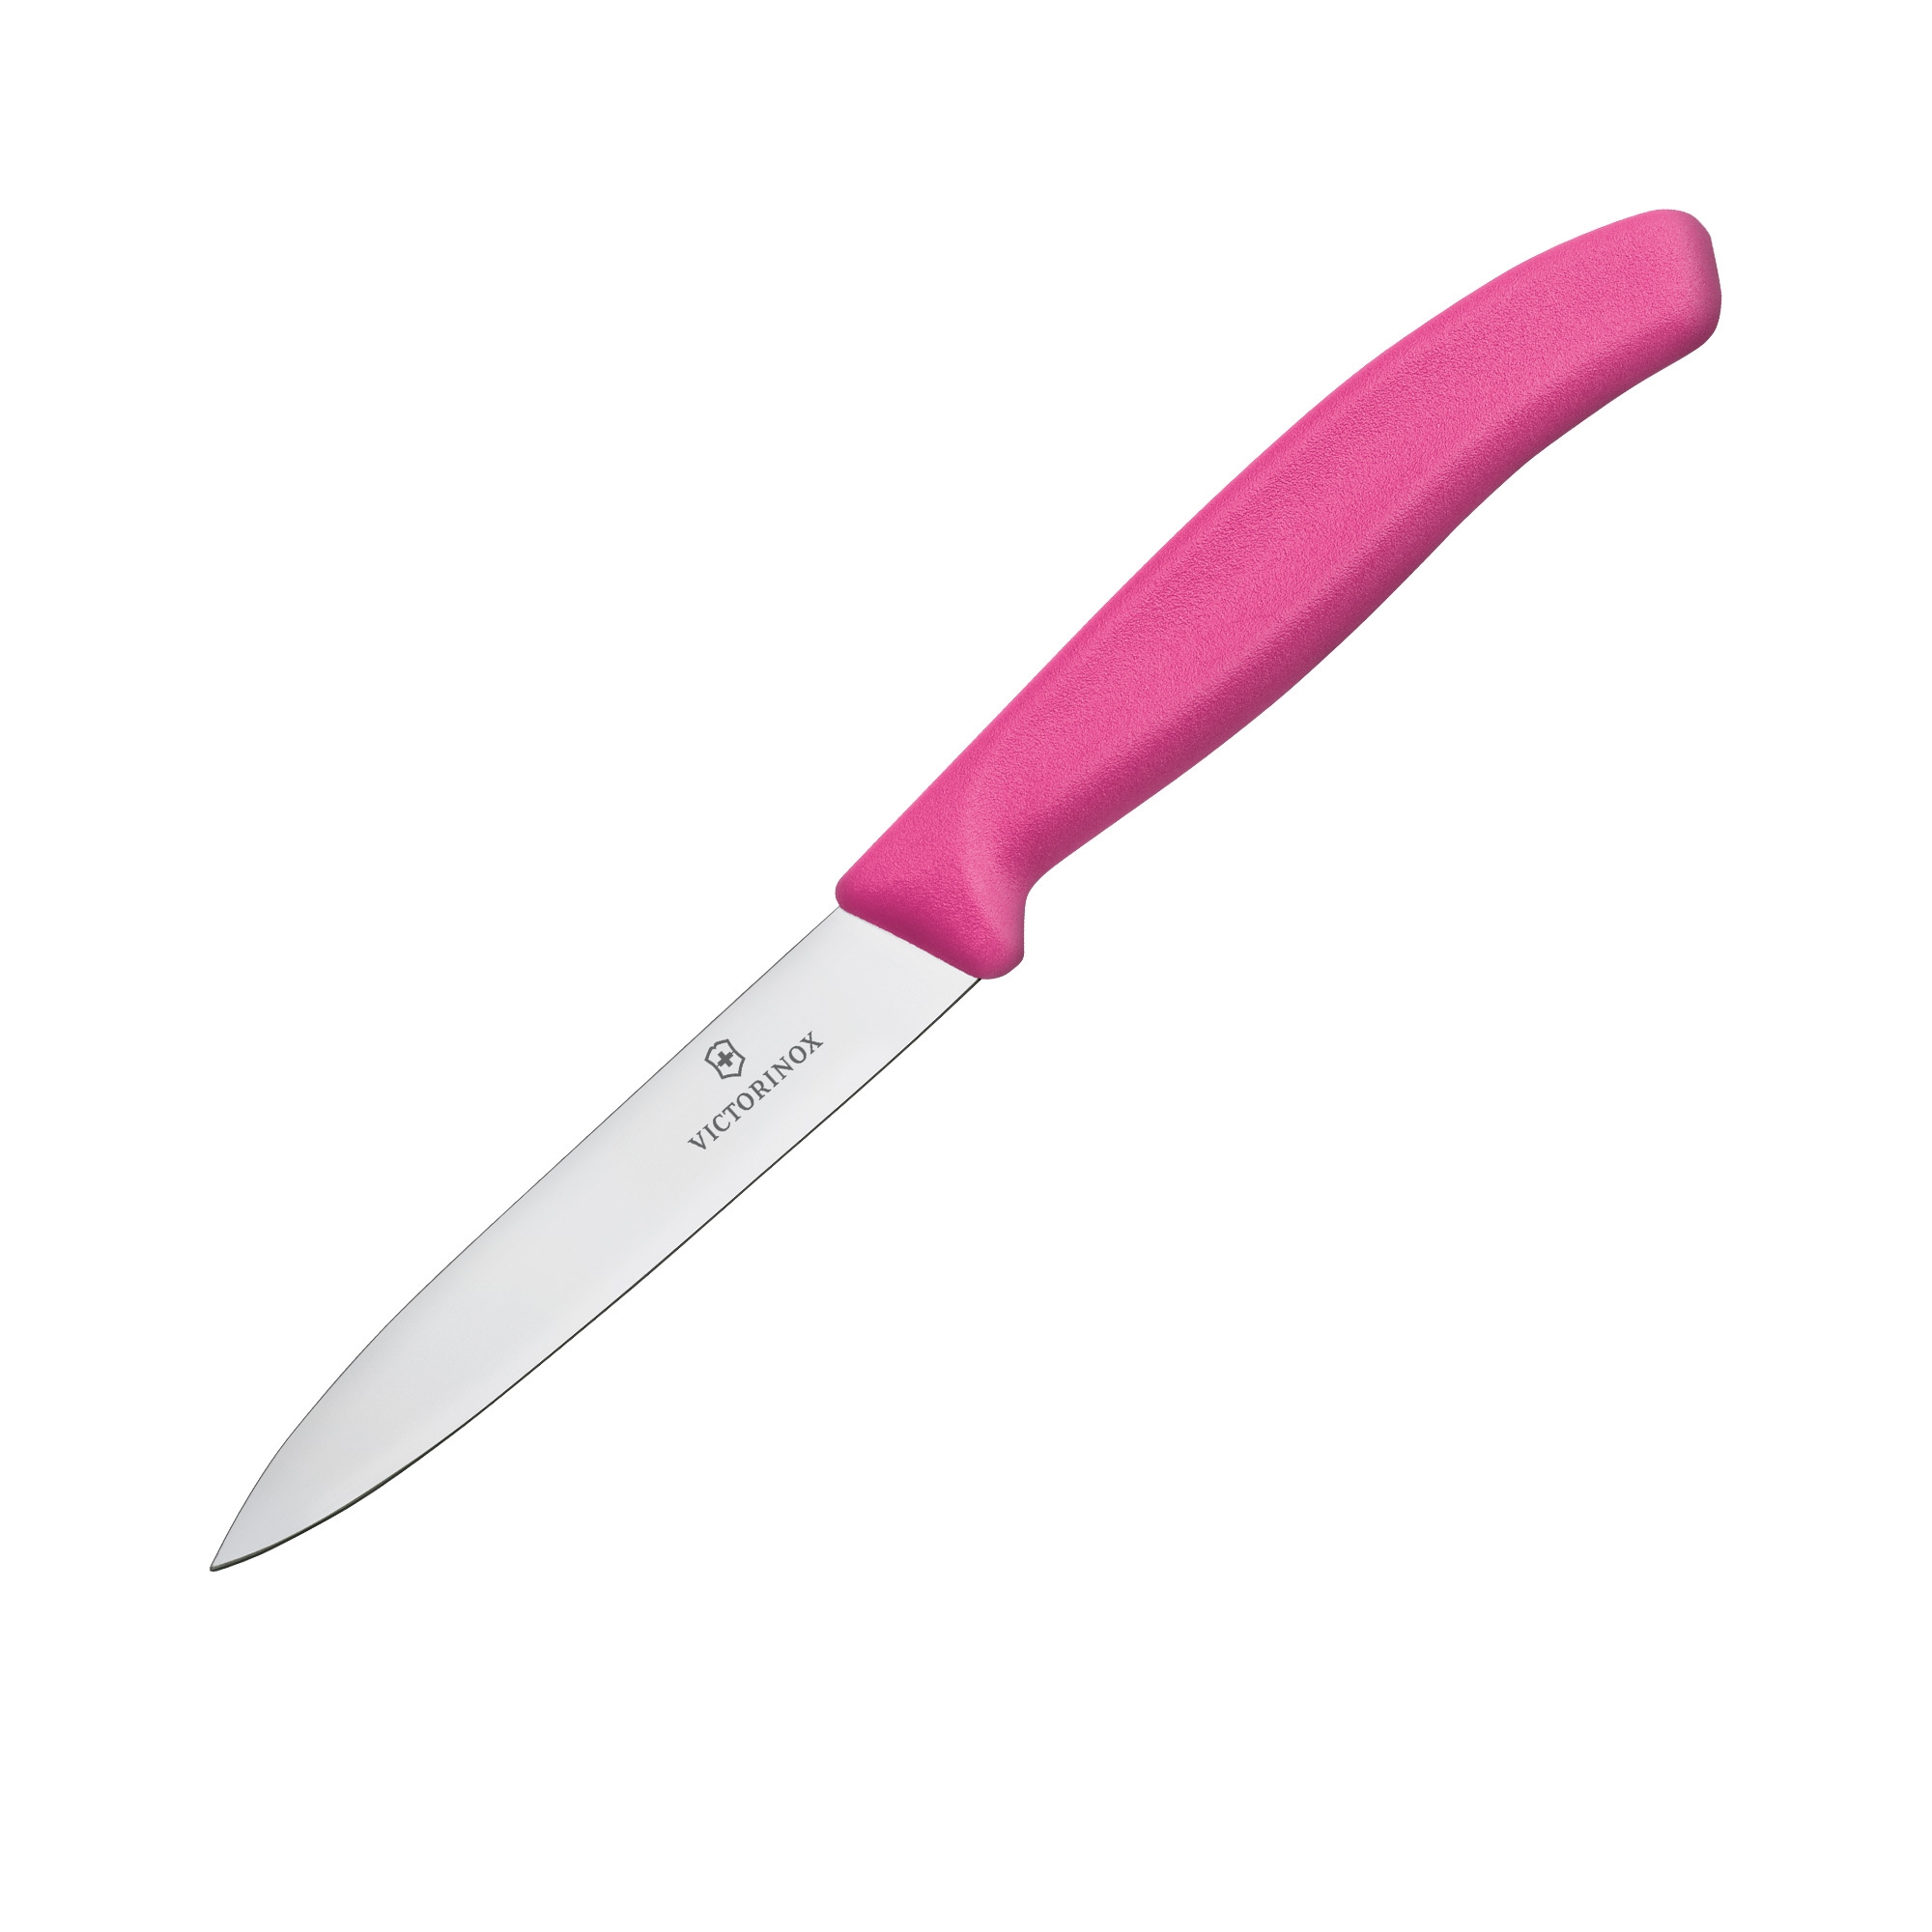 Victorinox Swiss Classic Pointed Tip Vegetable Knife 10cm Pink Image 1